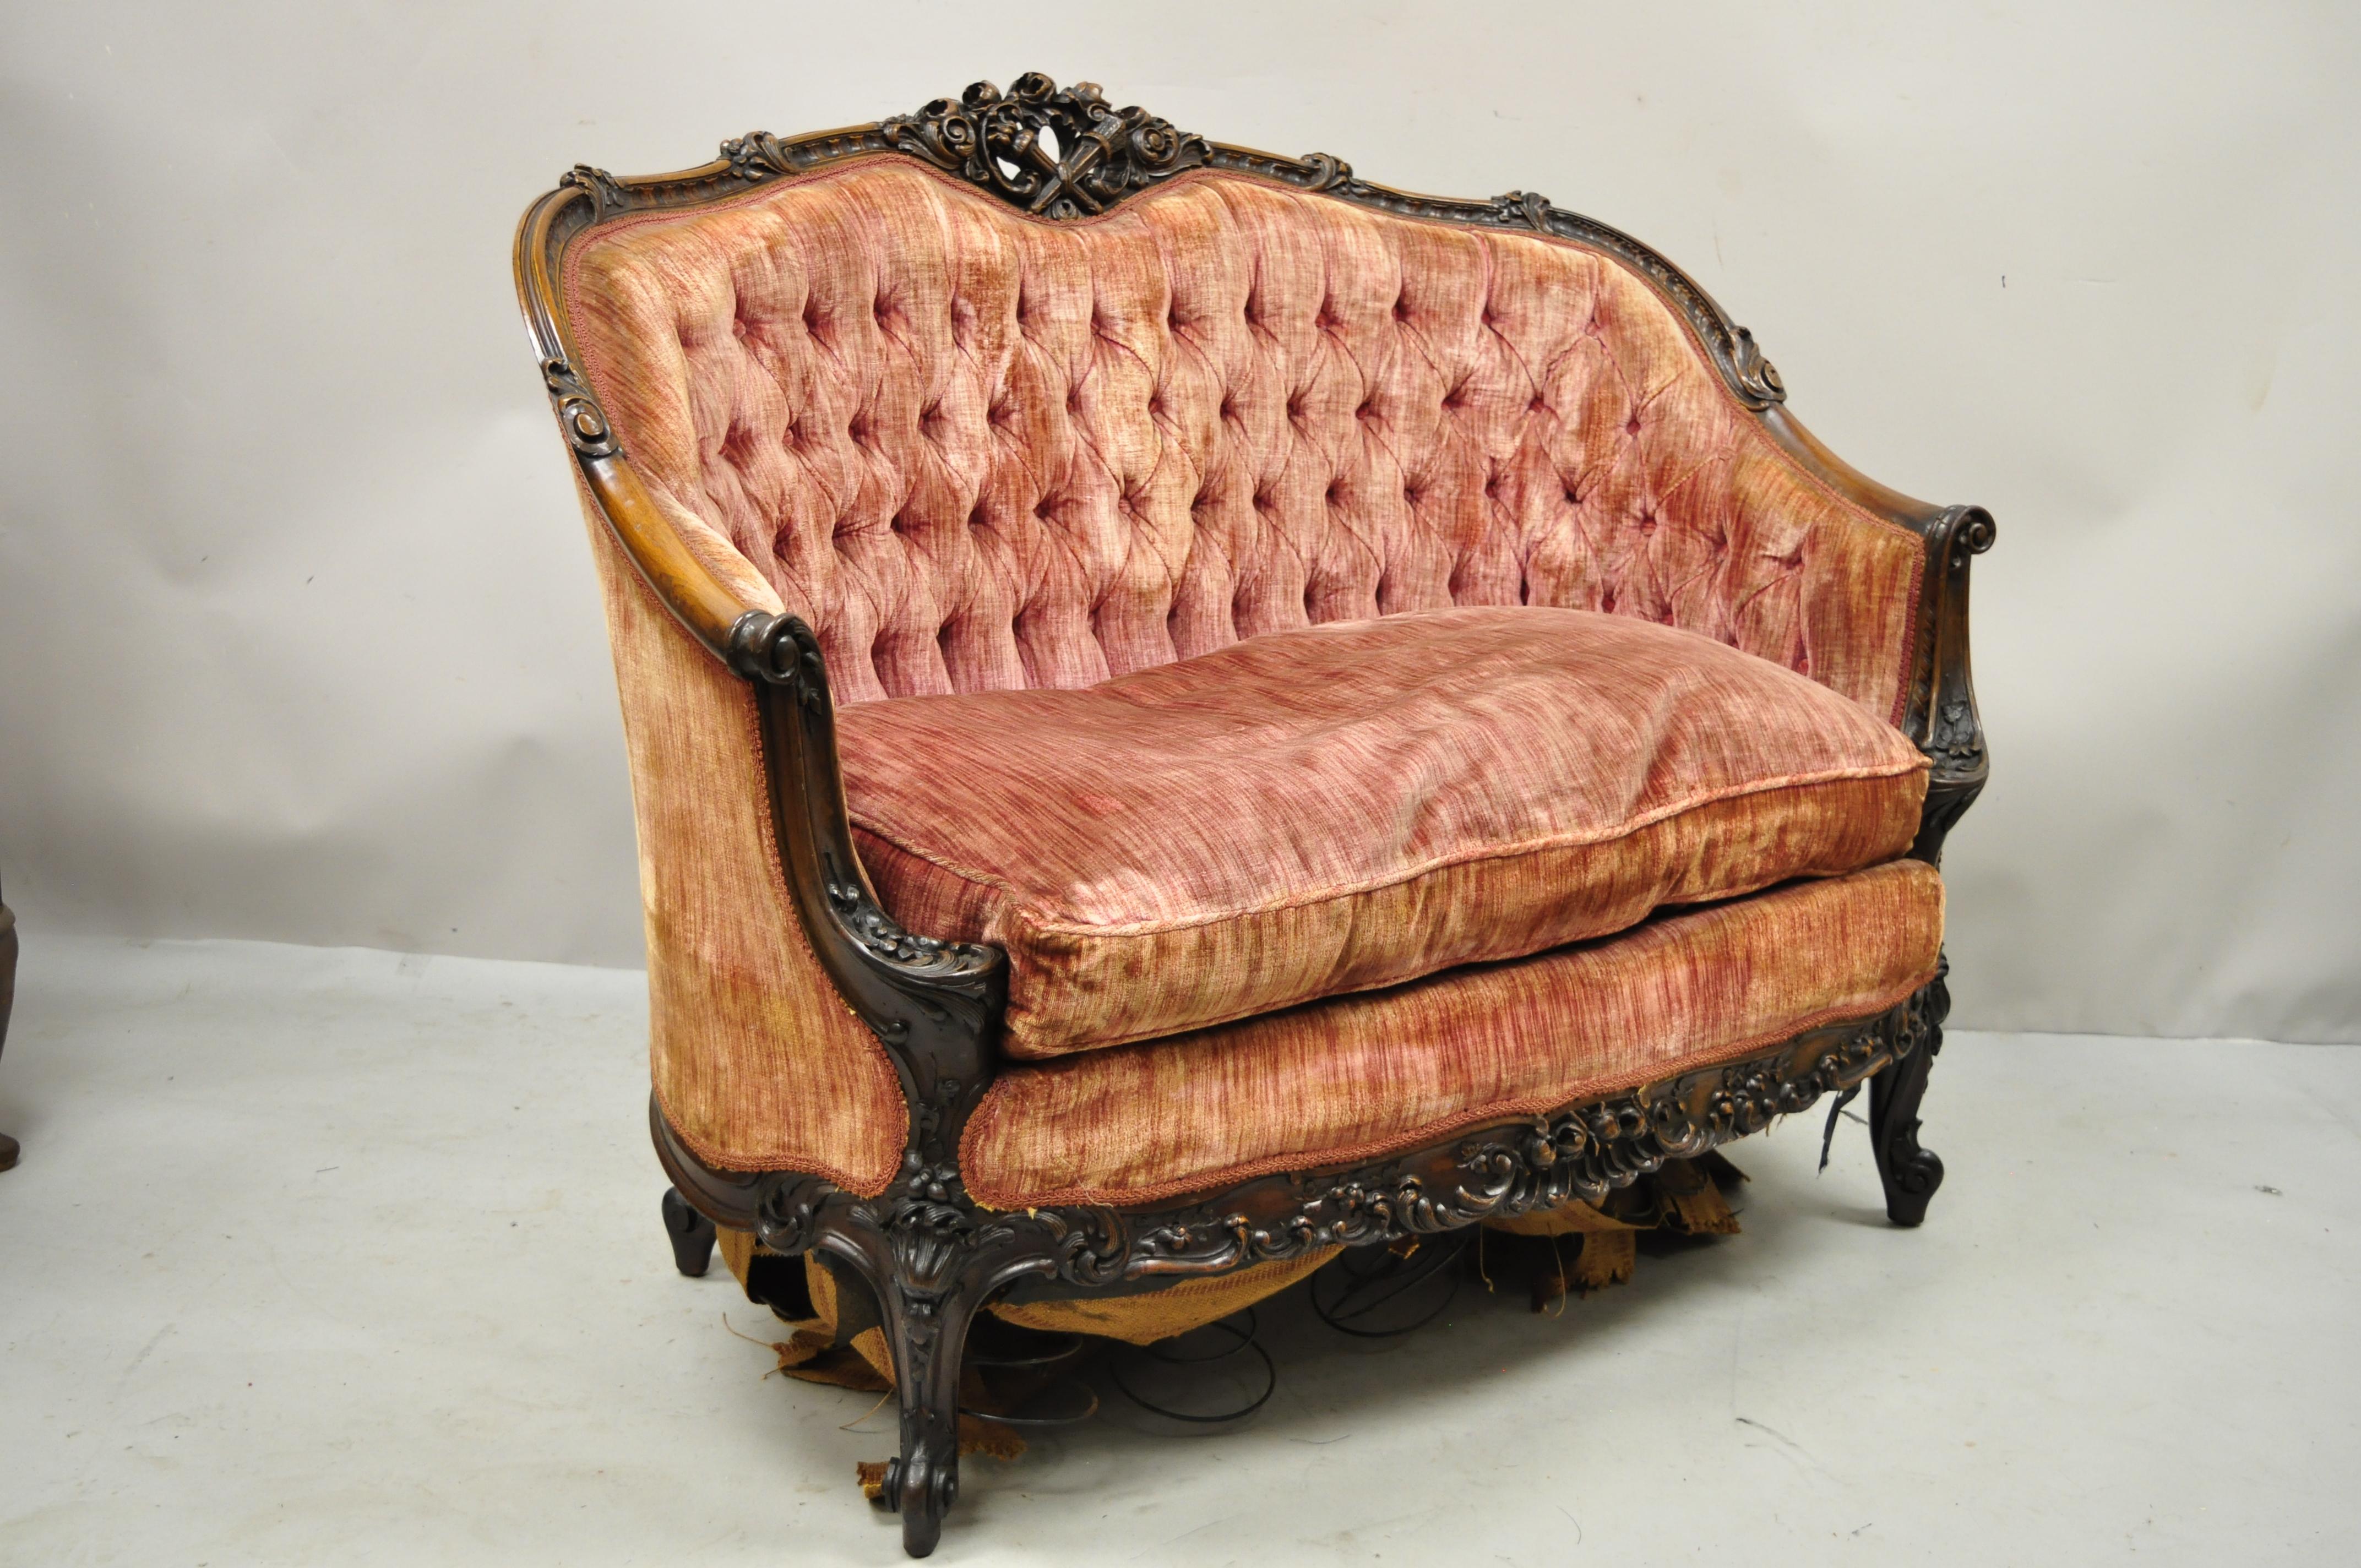 Antique French Louis XV Rococo Style ornate carved mahogany settee loveseat sofa. Item features remarkable and fine carvings throughout, solid wood frame, beautiful wood grain, cabriole legs, very nice antique item, great style and form. Circa Early